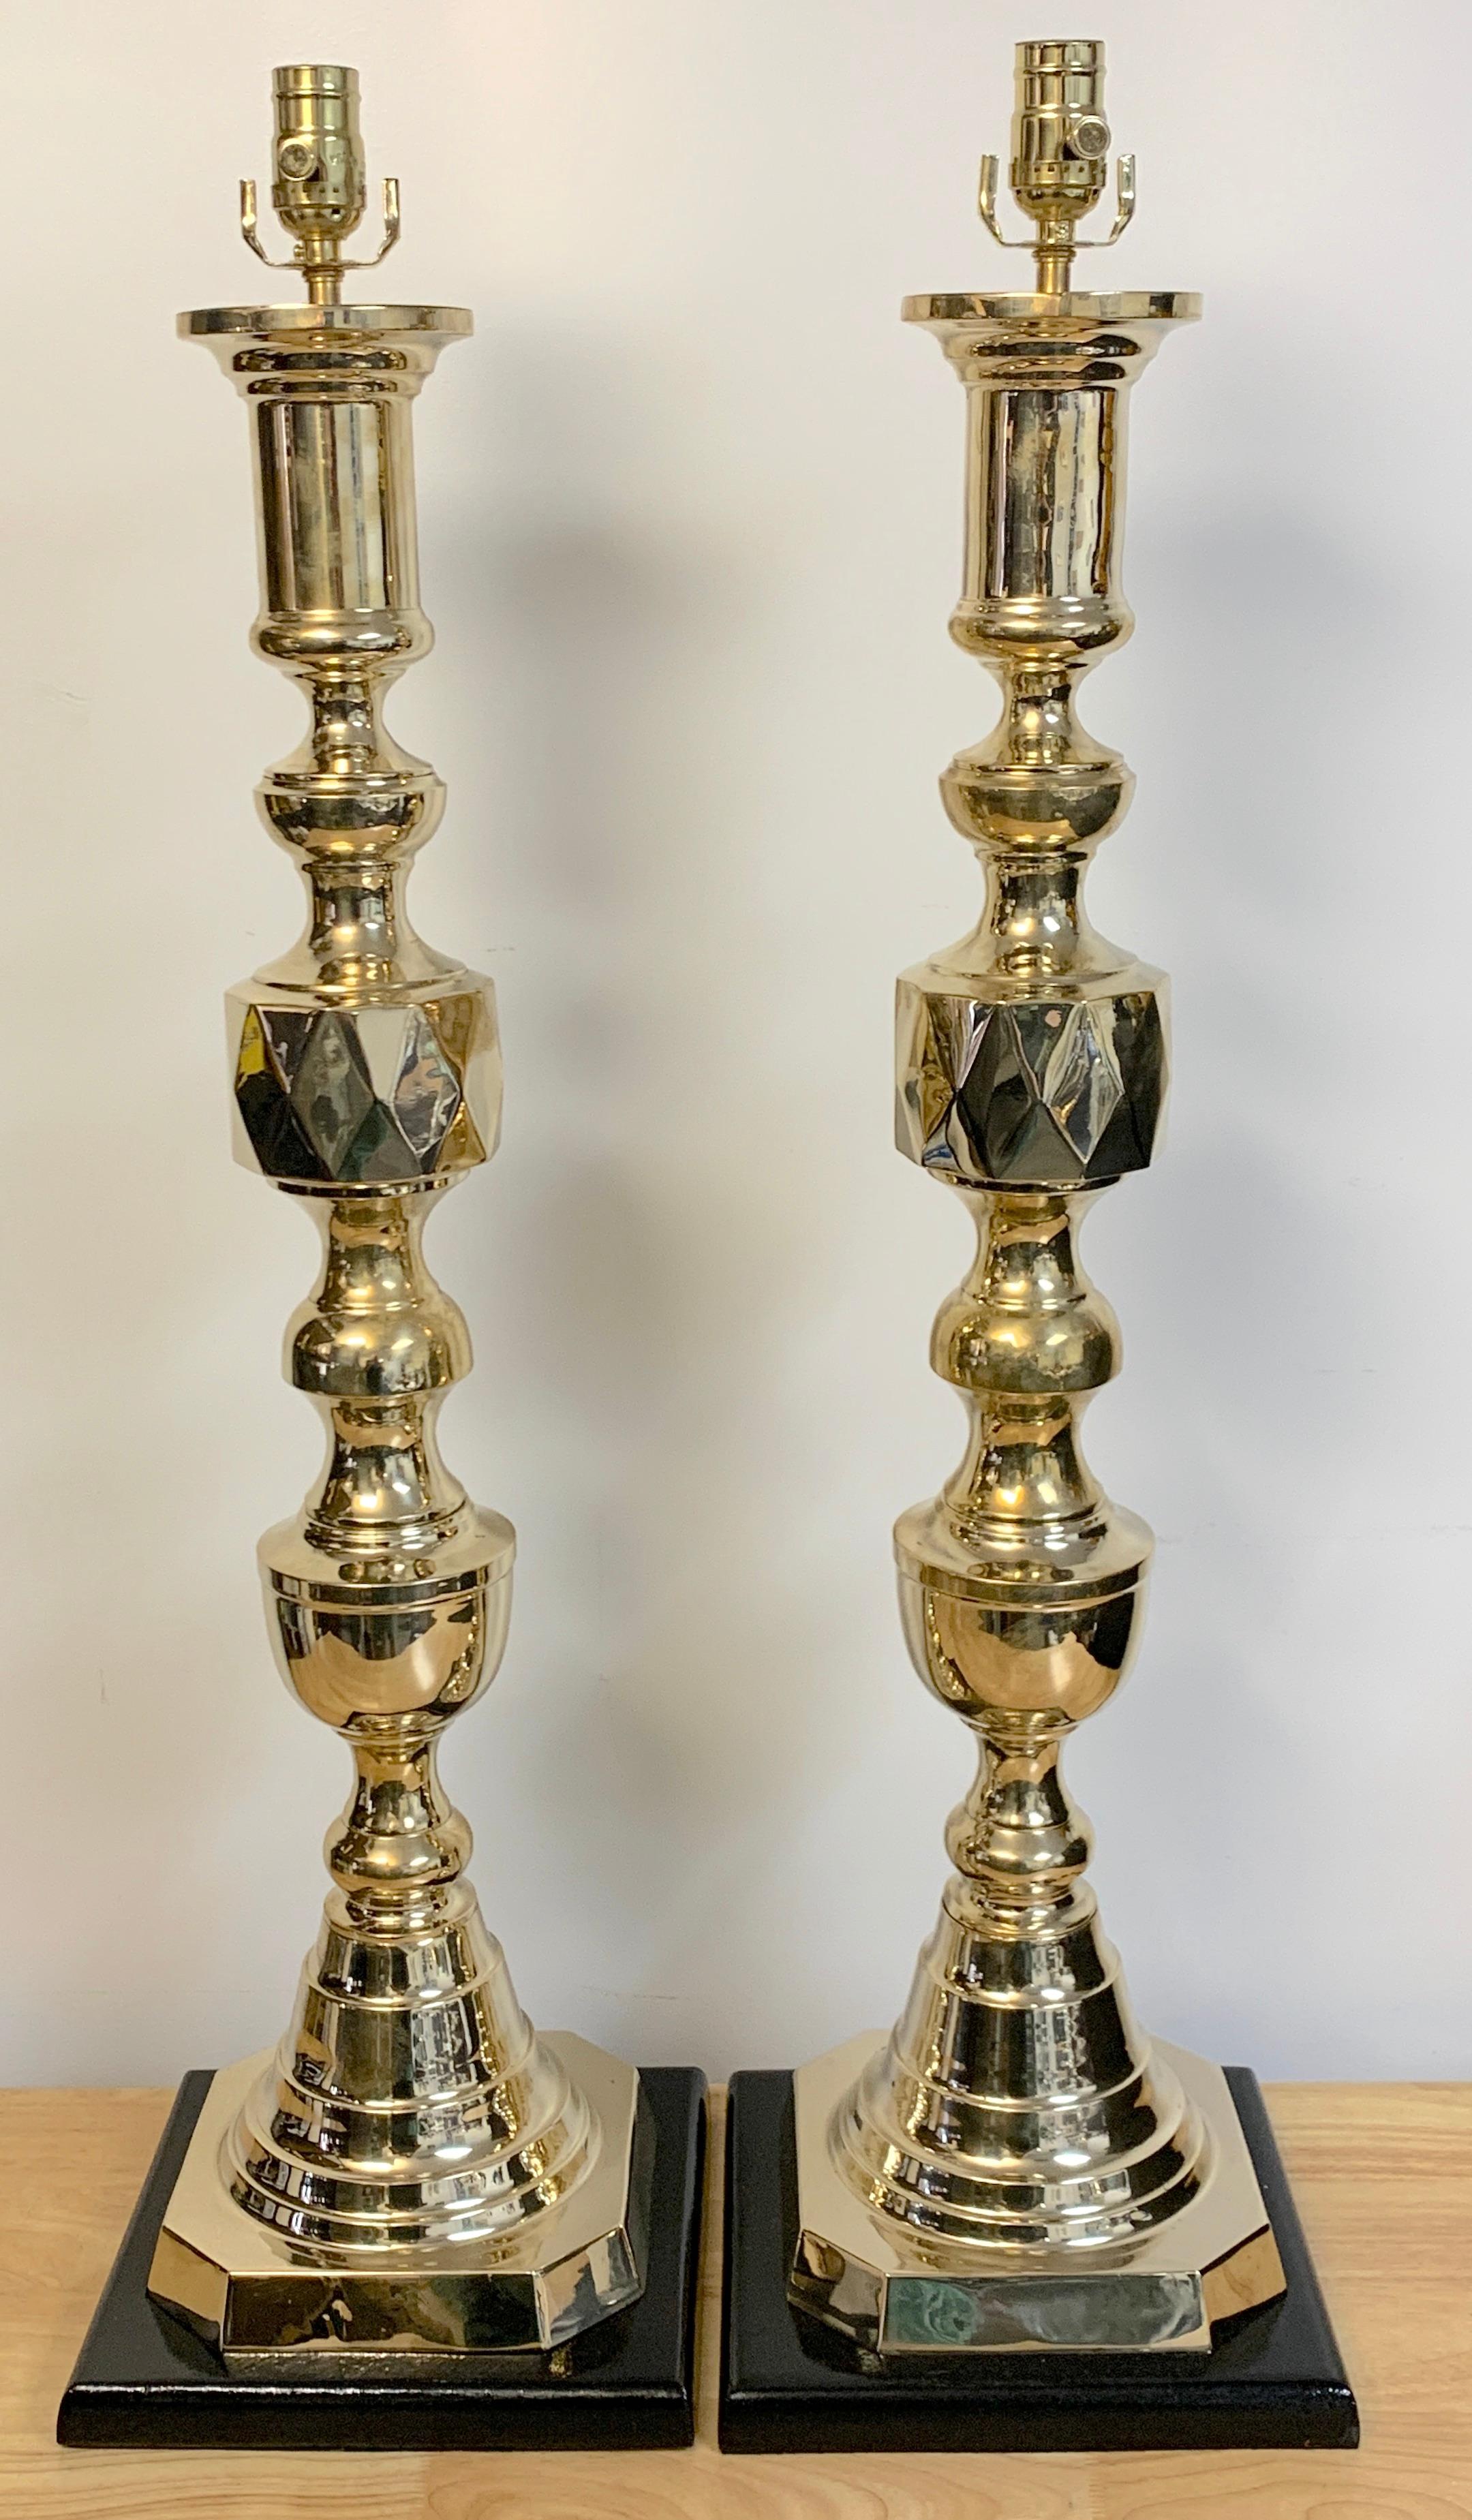 Pair of monumental 'Ace of Diamonds' brass candlestick lamps
Each one of the 'Ace of Diamonds' pattern, the candlestick alone measures 31-Inches high x 8-Inch square base. Raised on 10-Inch square ebonized wood base, 36-Inches high to the top of